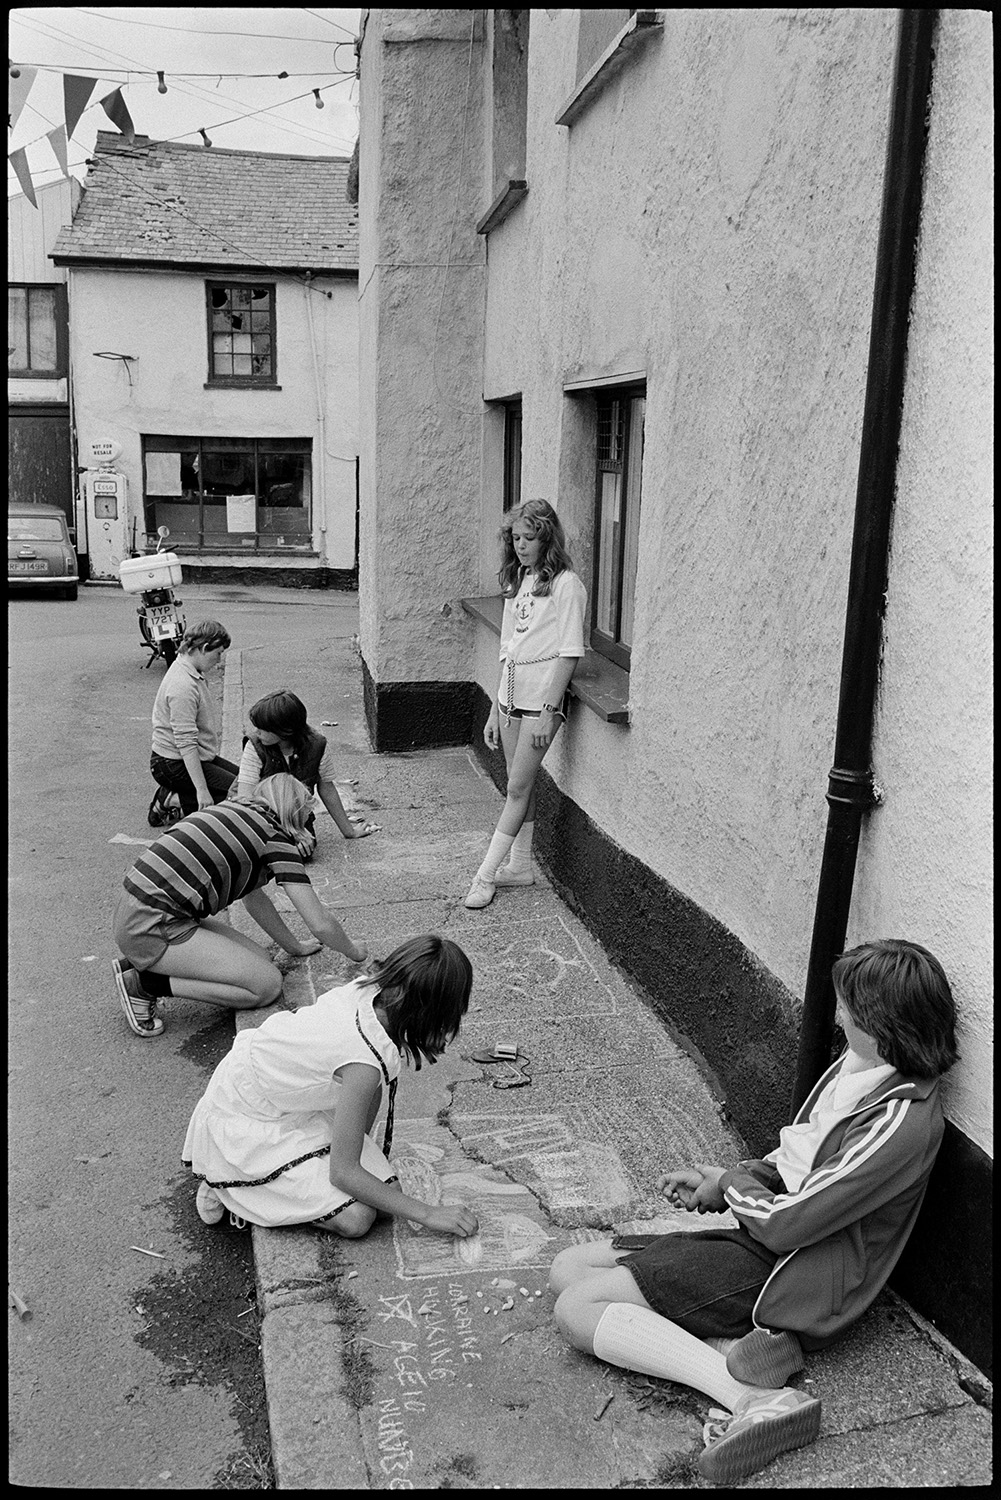 People waiting for fair, cat, pavement artists, Morris Dance.
[Six children, drawing on a pavement with chalk during Winkleigh Fair. A mini car, moped, petrol pump, bunting and cottages are visible in the background.]